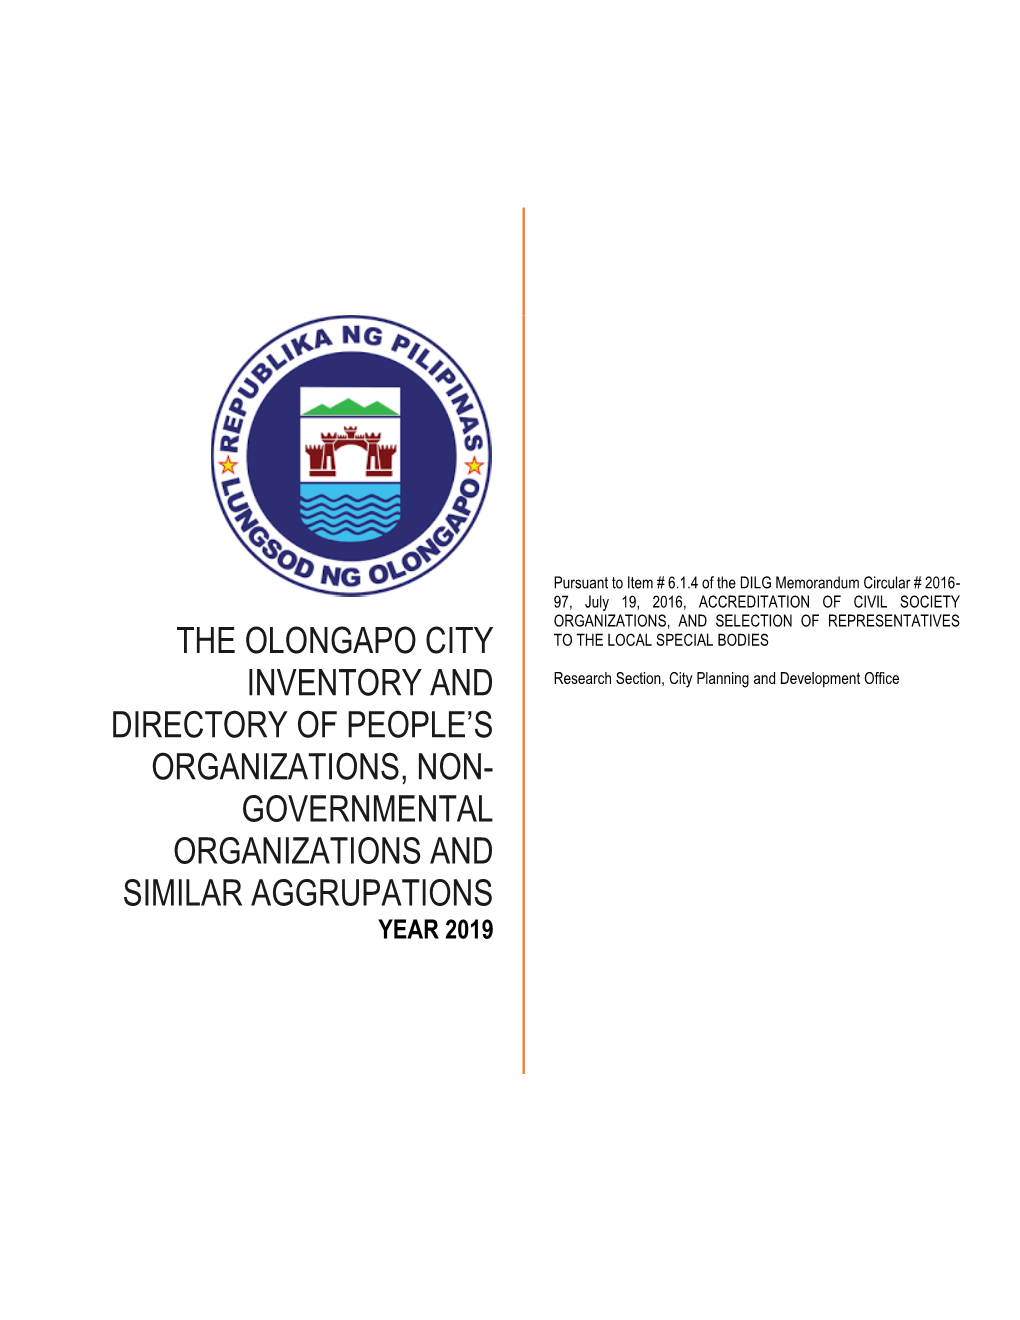 PDF 2019 Olongapo City Inventory and Directory of Non-Governmental